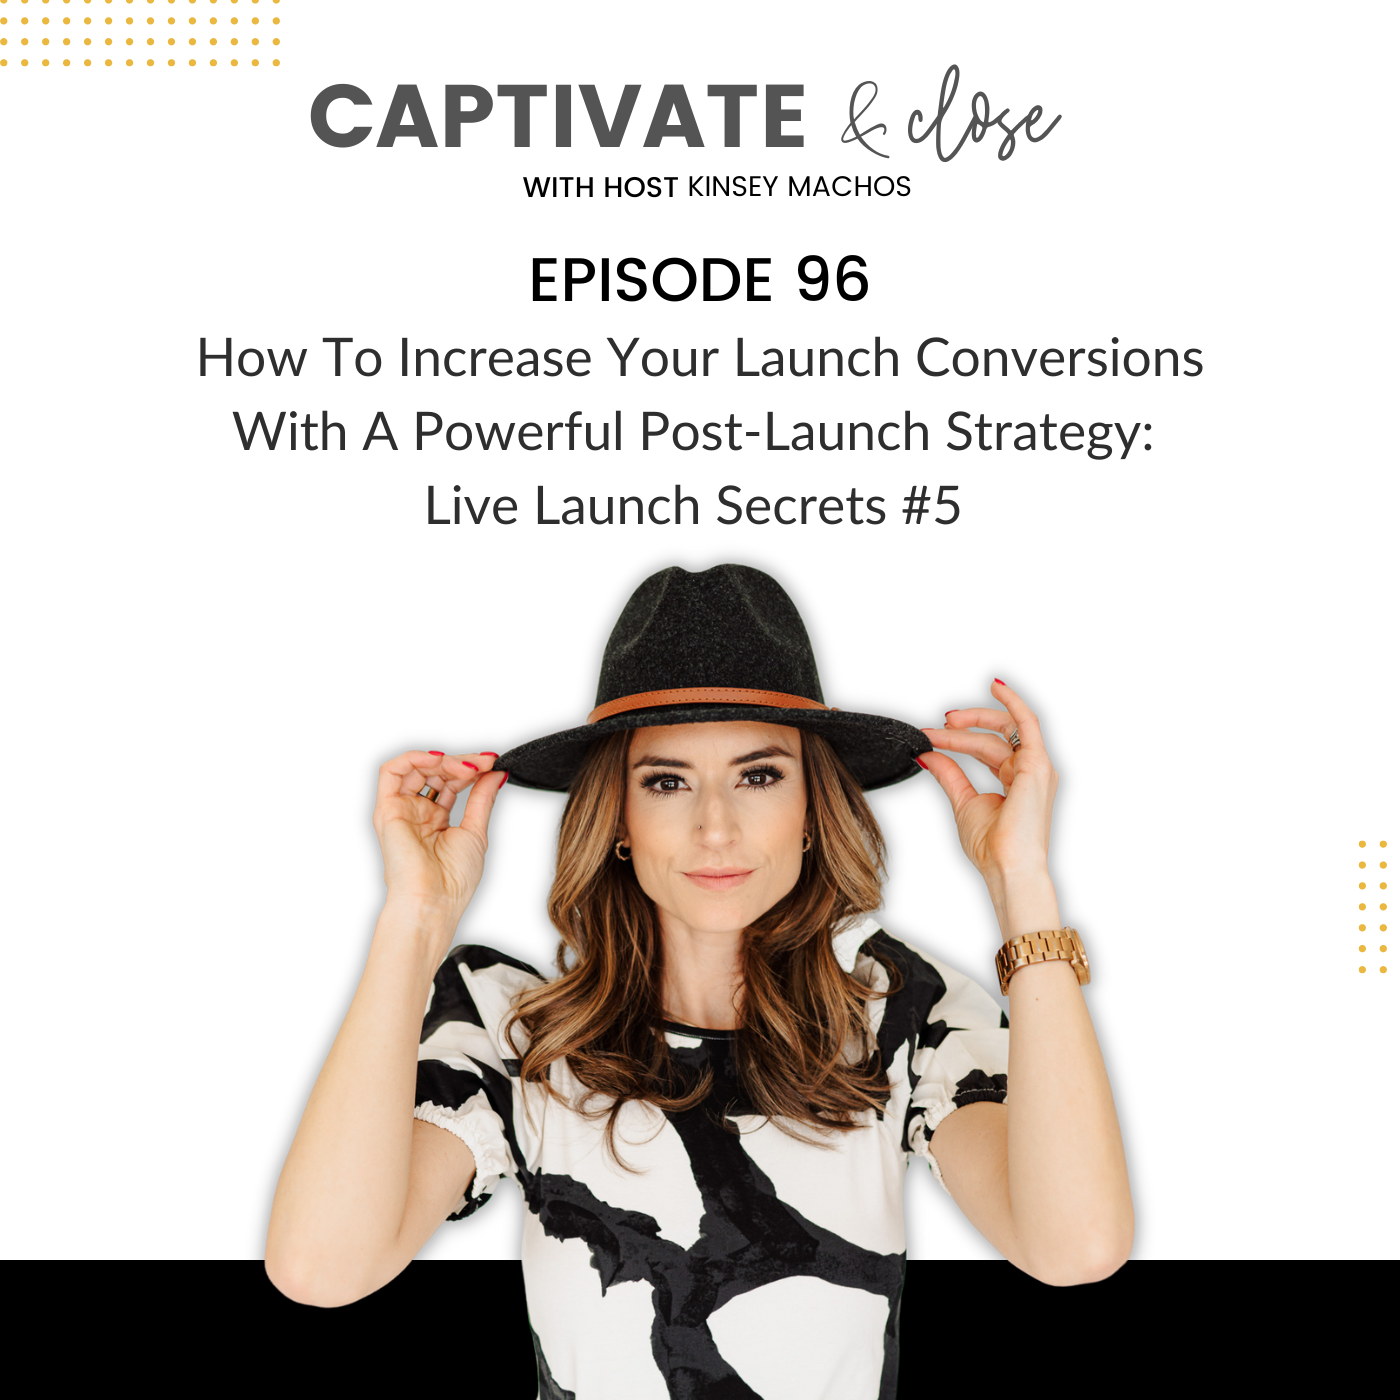 How To Increase Your Launch Conversions With A Powerful Post-Launch Strategy: Live Launch Secrets #5